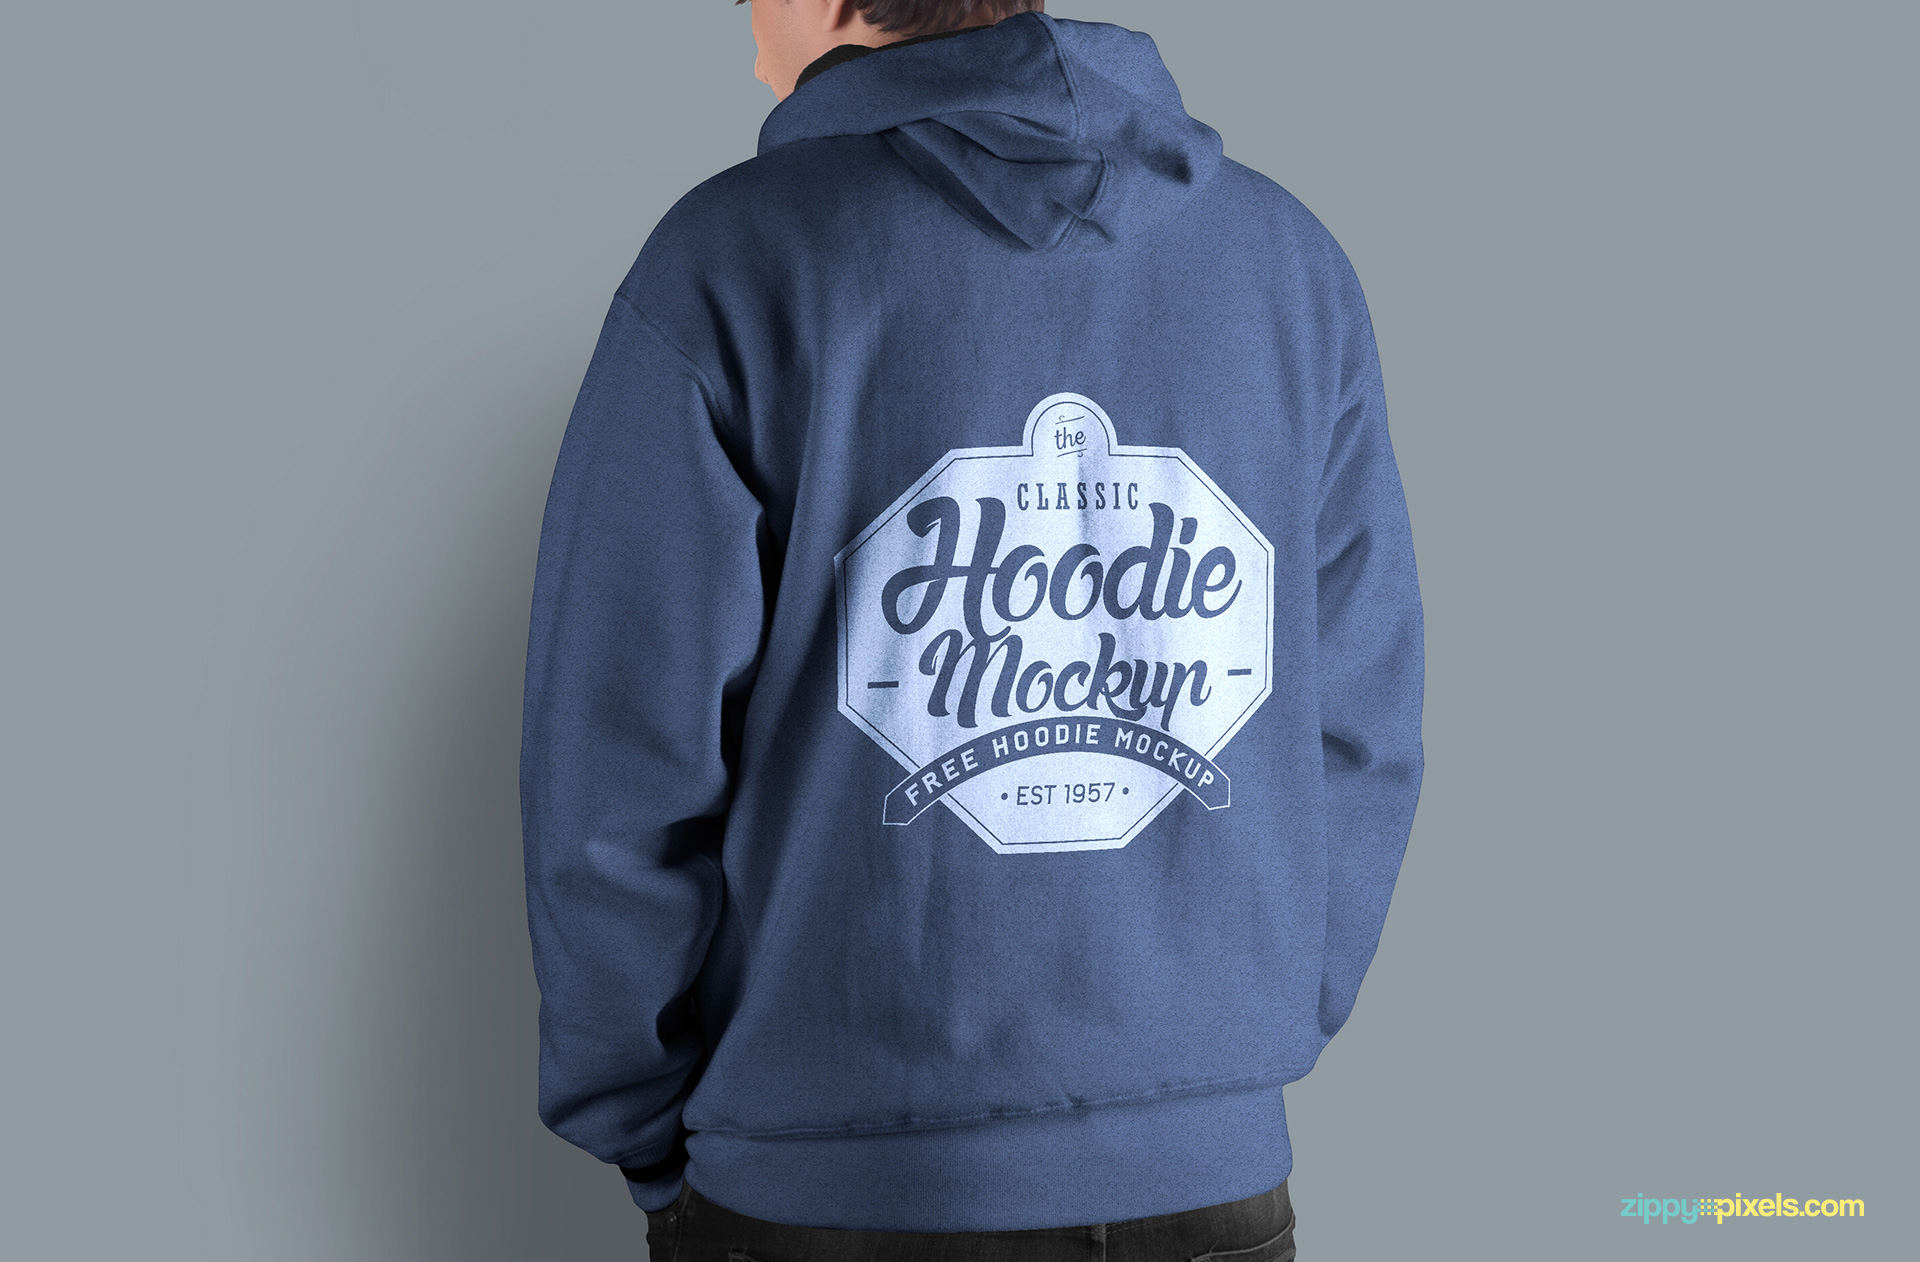 free hoodie mockup psd to showcase your clothing designs